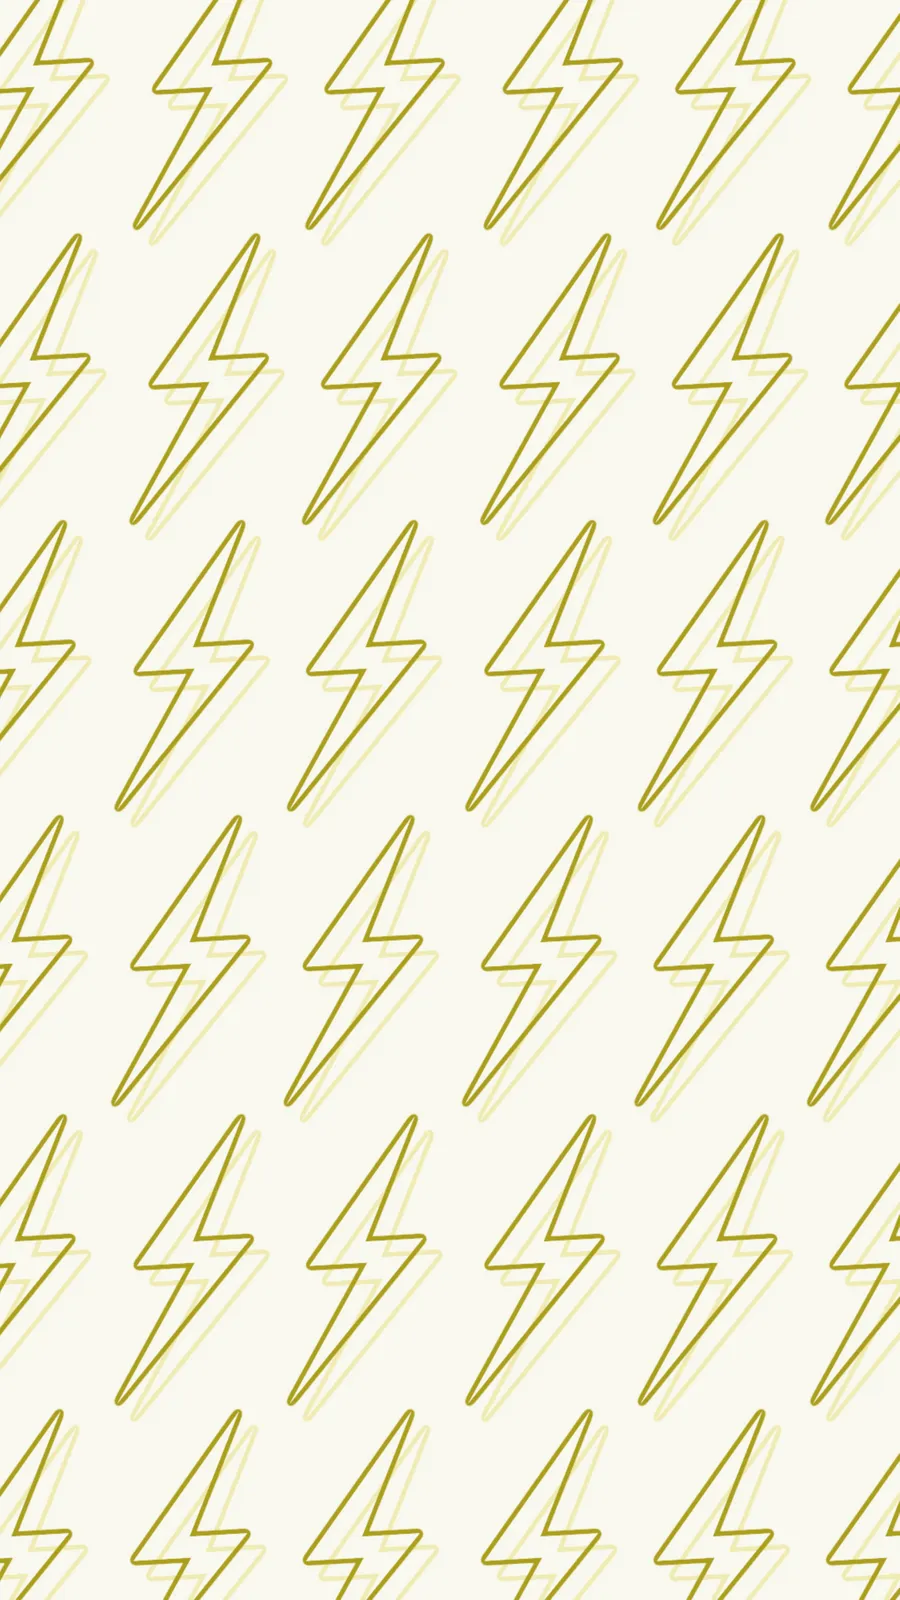 Thunder Icons zoom-backgrounds template